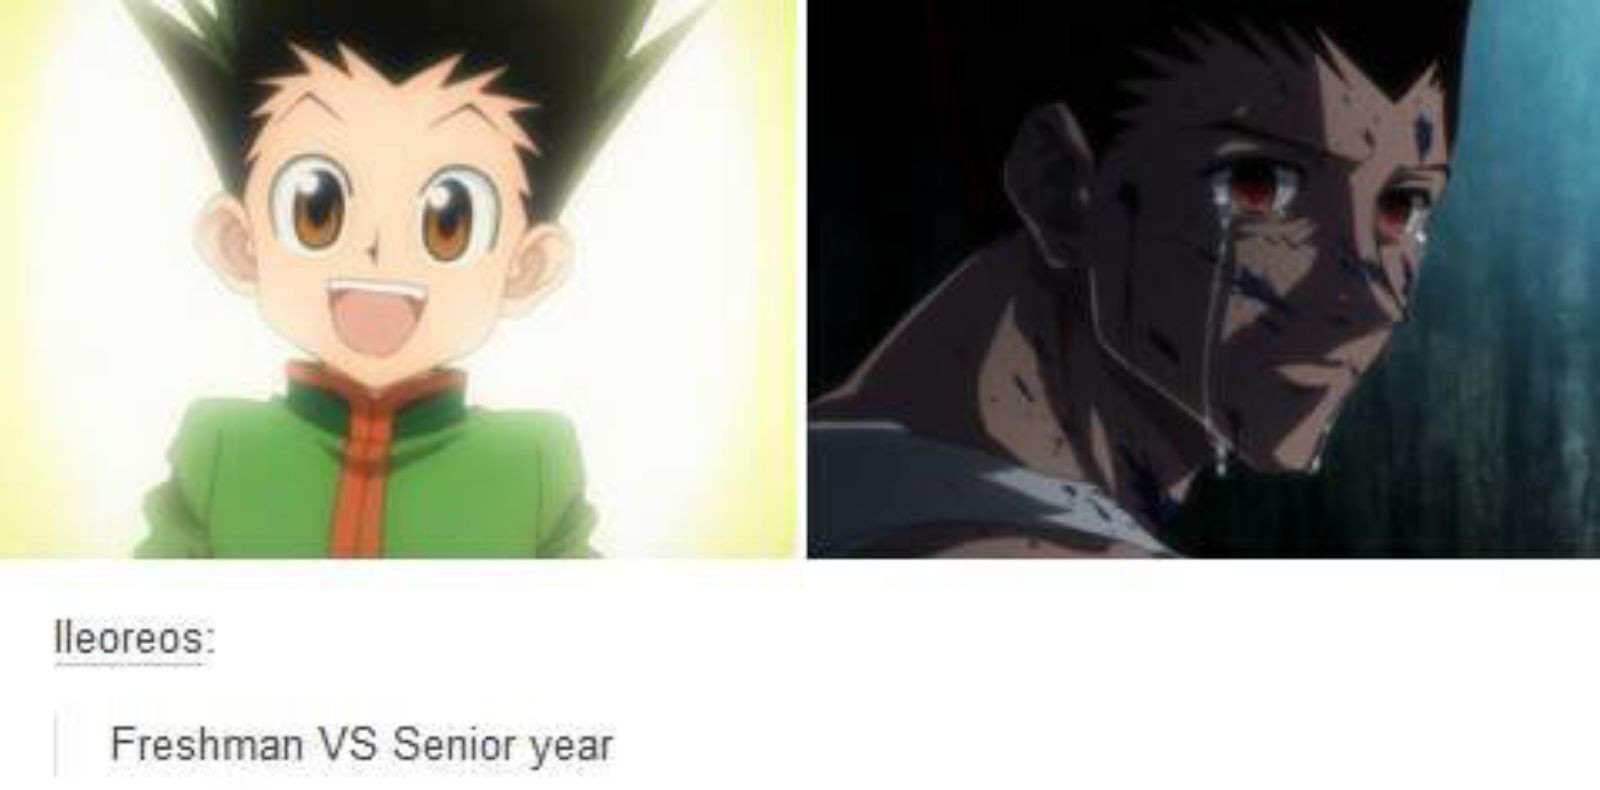 Leorio faps too much - Meme by B2-_. :) Memedroid